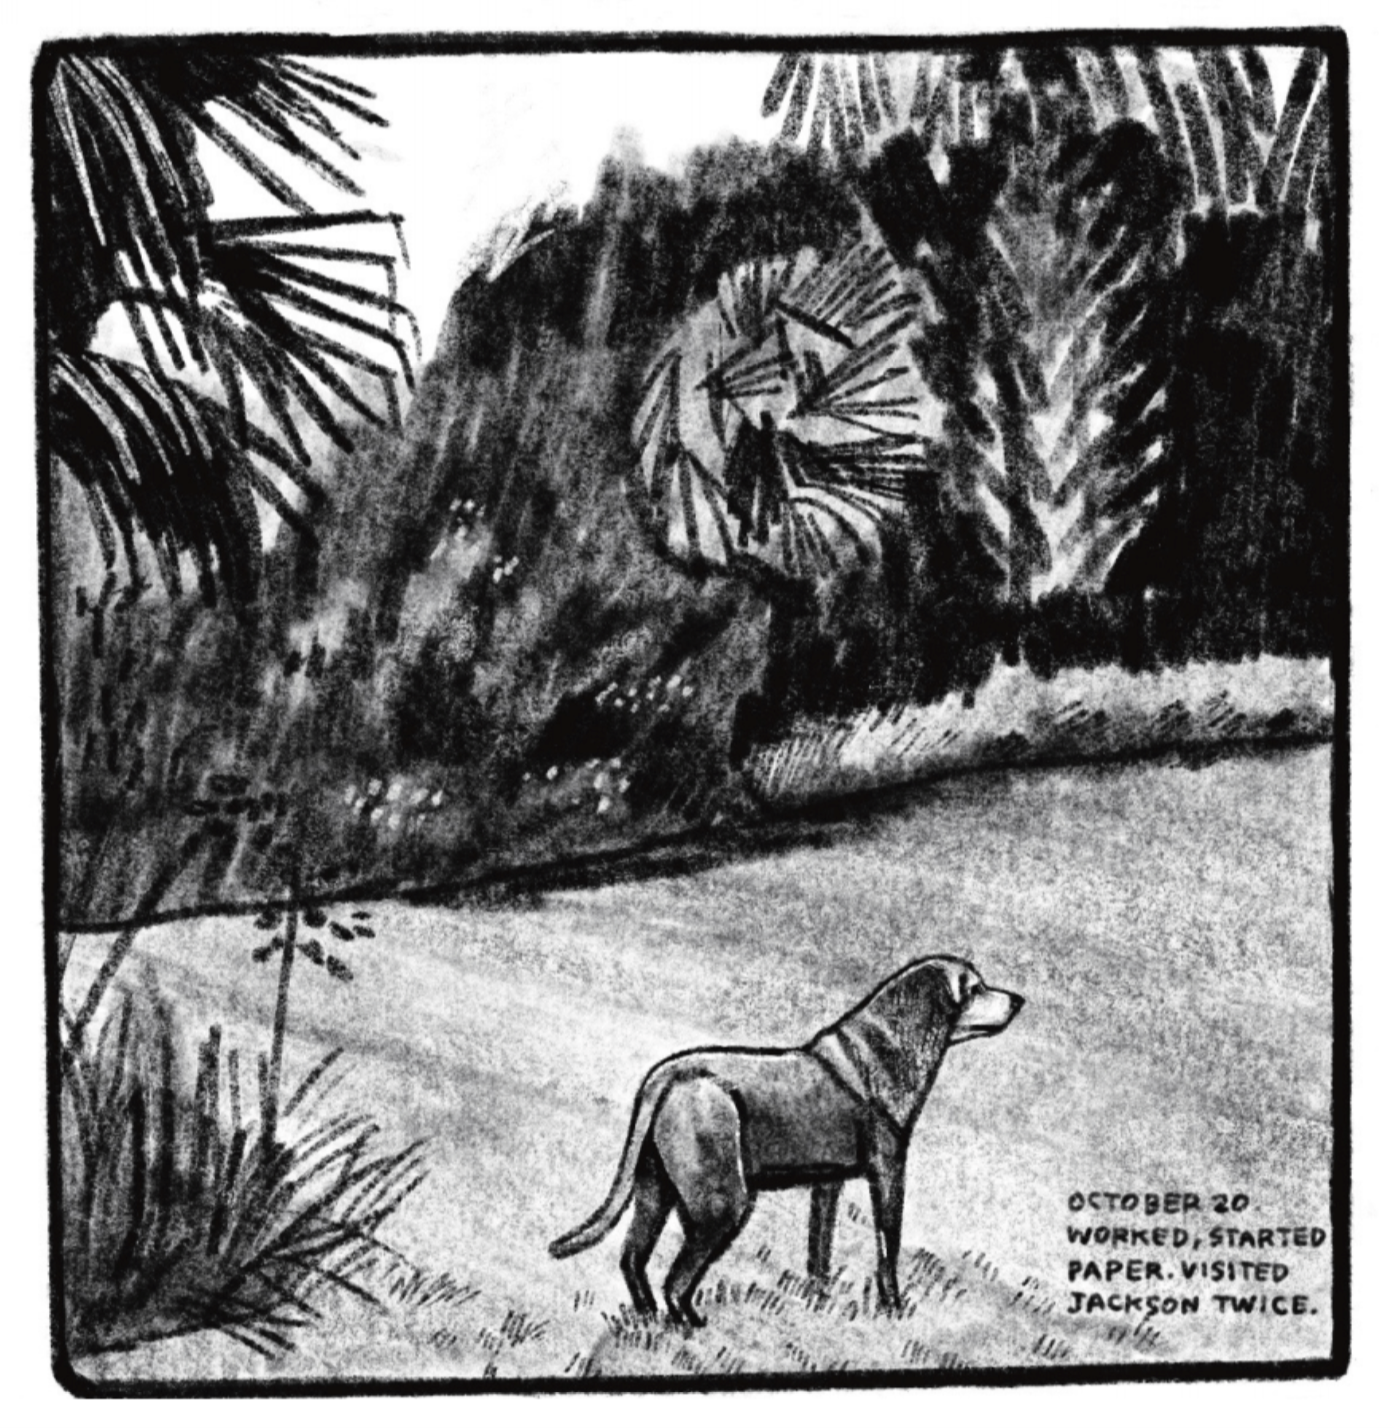 Kimâ€™s dog stands outside in a field, looking off into the distance ahead of him. There are palm trees, flowers, shrubs, and a thicket of trees in the background and to the side, half-framing the panel. â€œOctober 20. Worked, started paper. Visited Jackson twice.â€